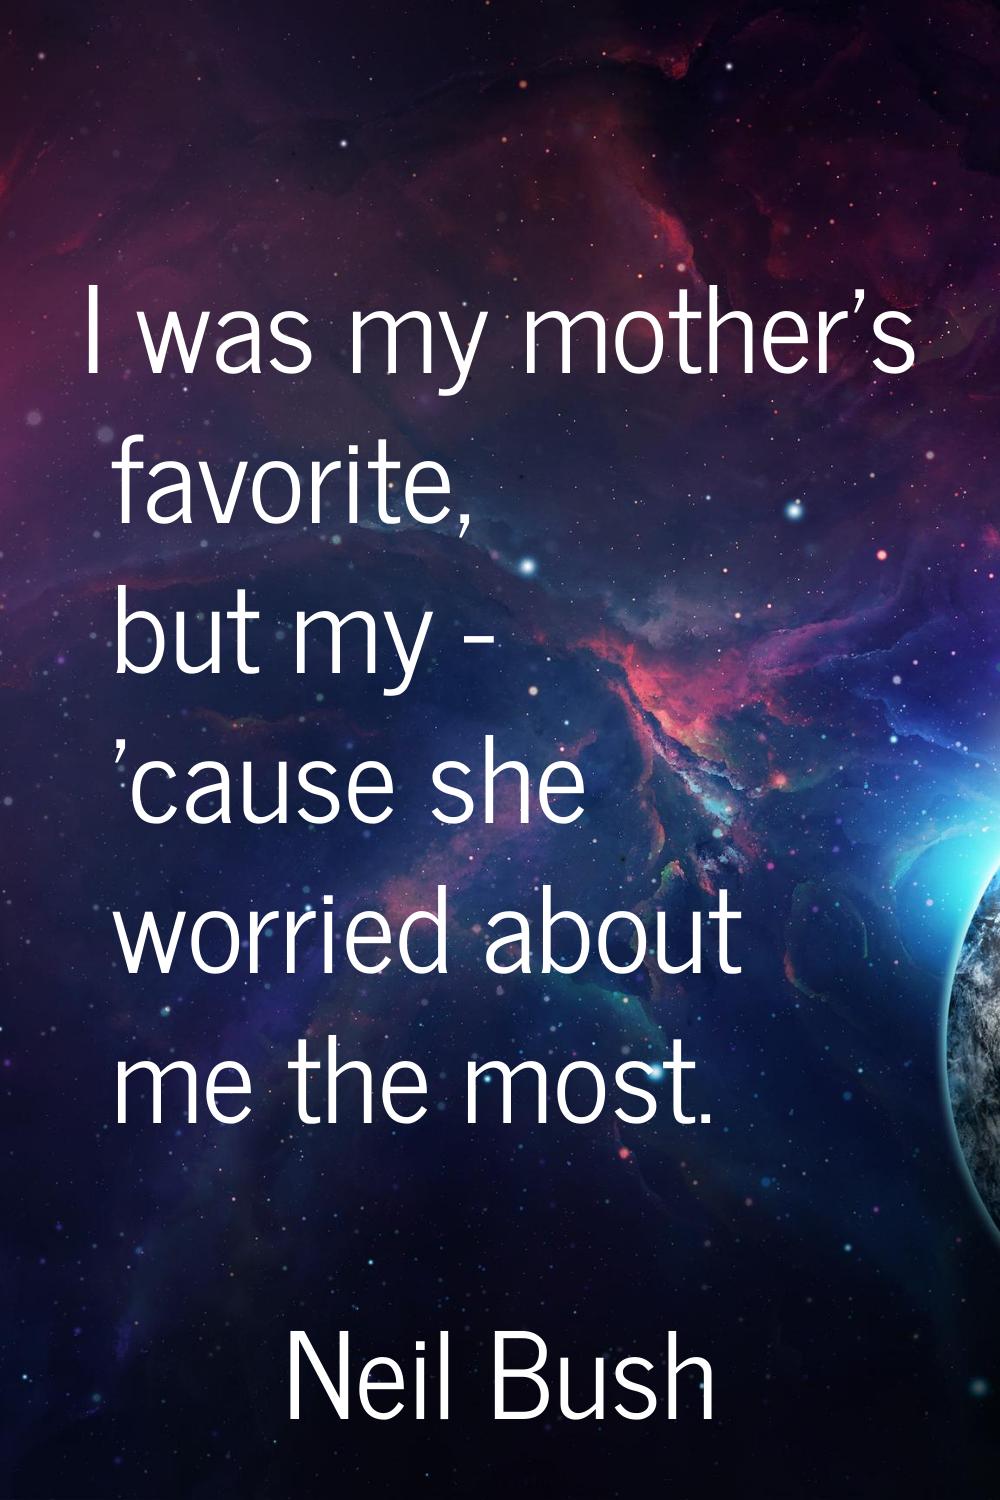 I was my mother's favorite, but my - 'cause she worried about me the most.